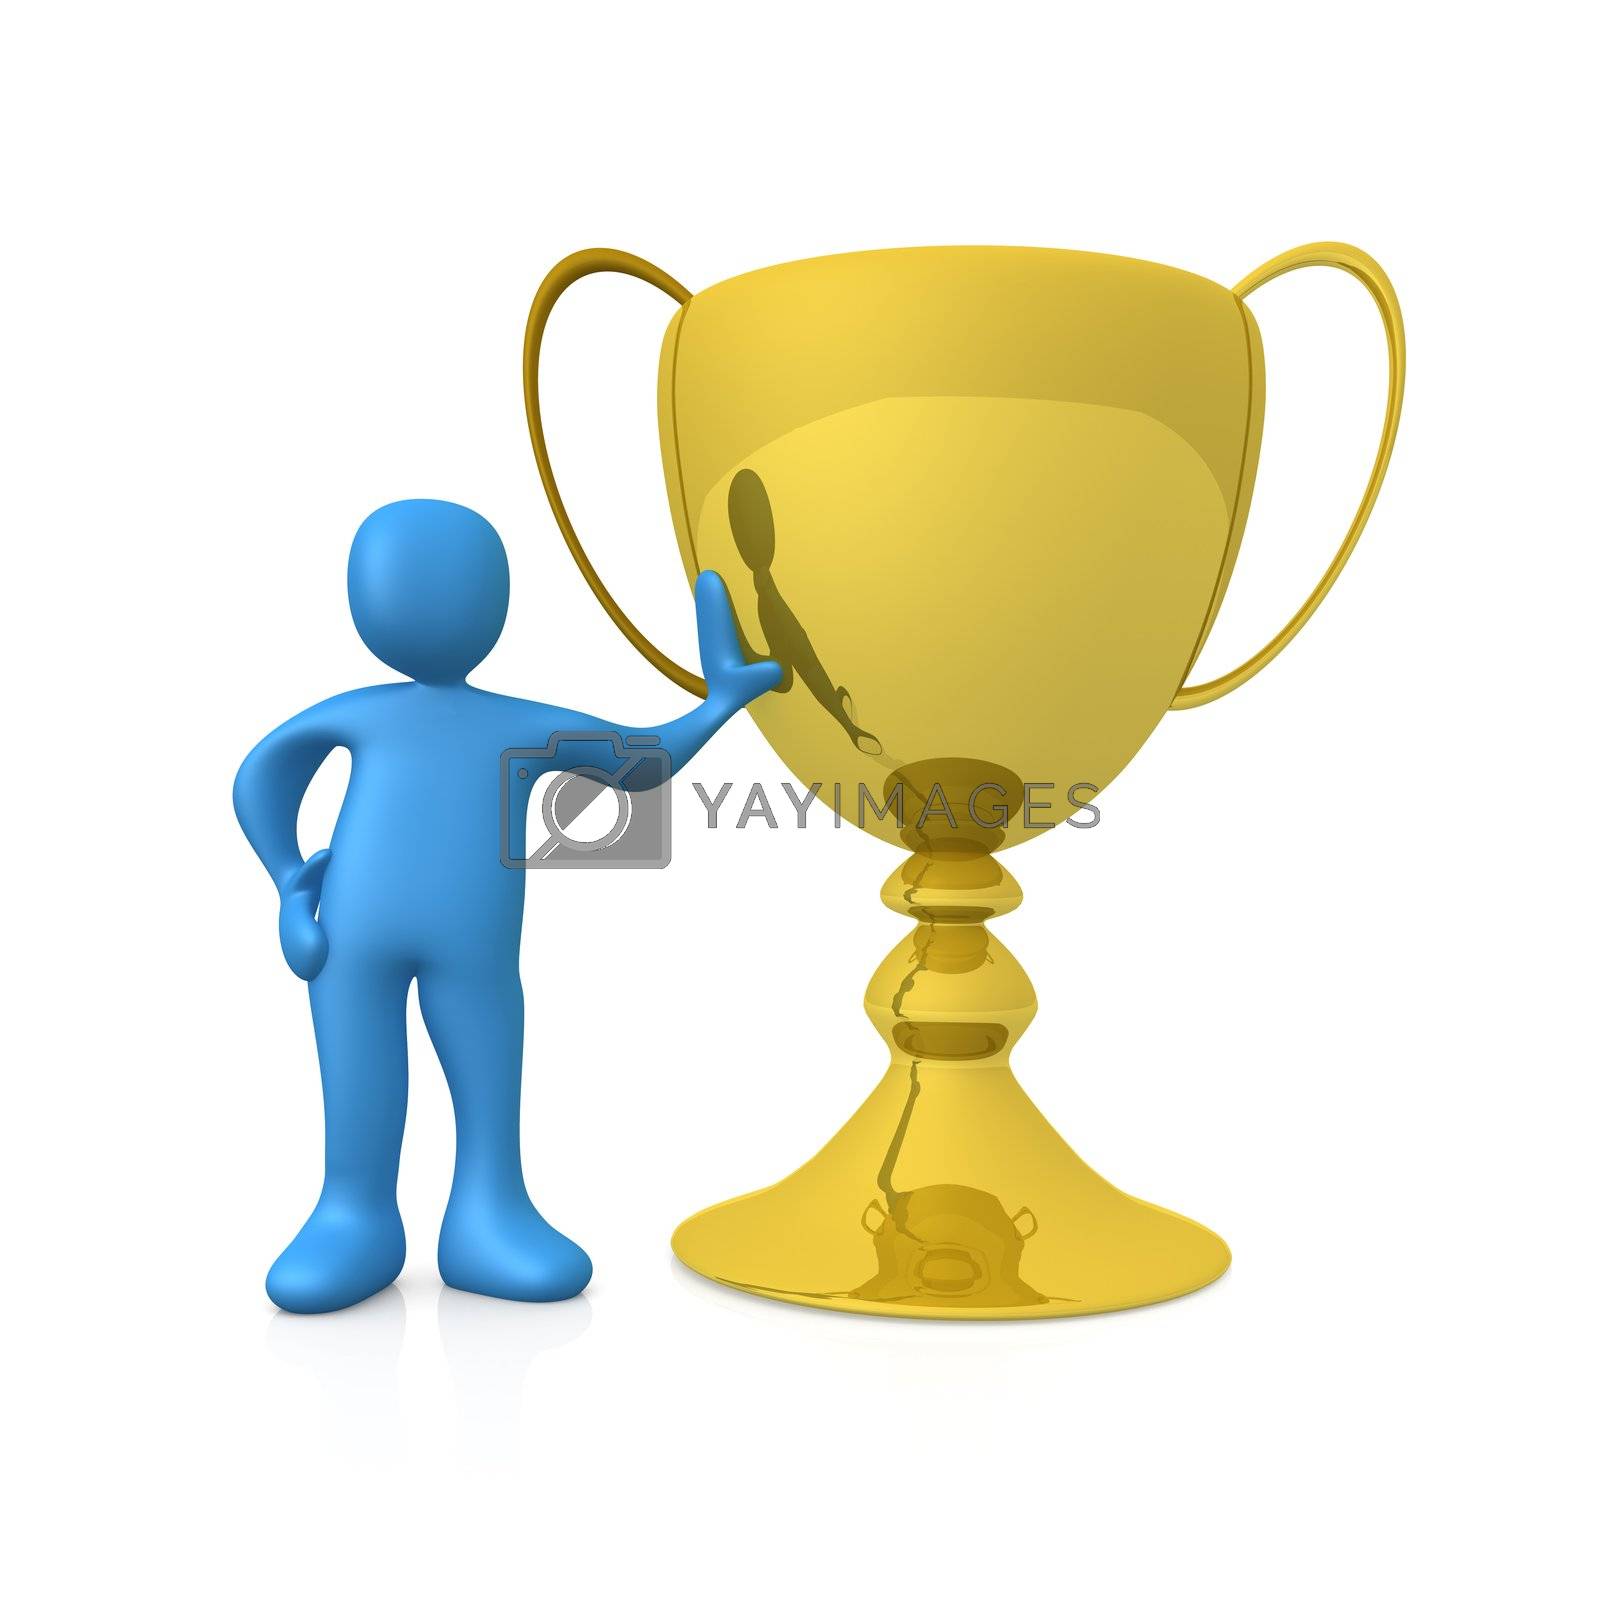 Royalty free image of Next To The Big Cup by 3pod